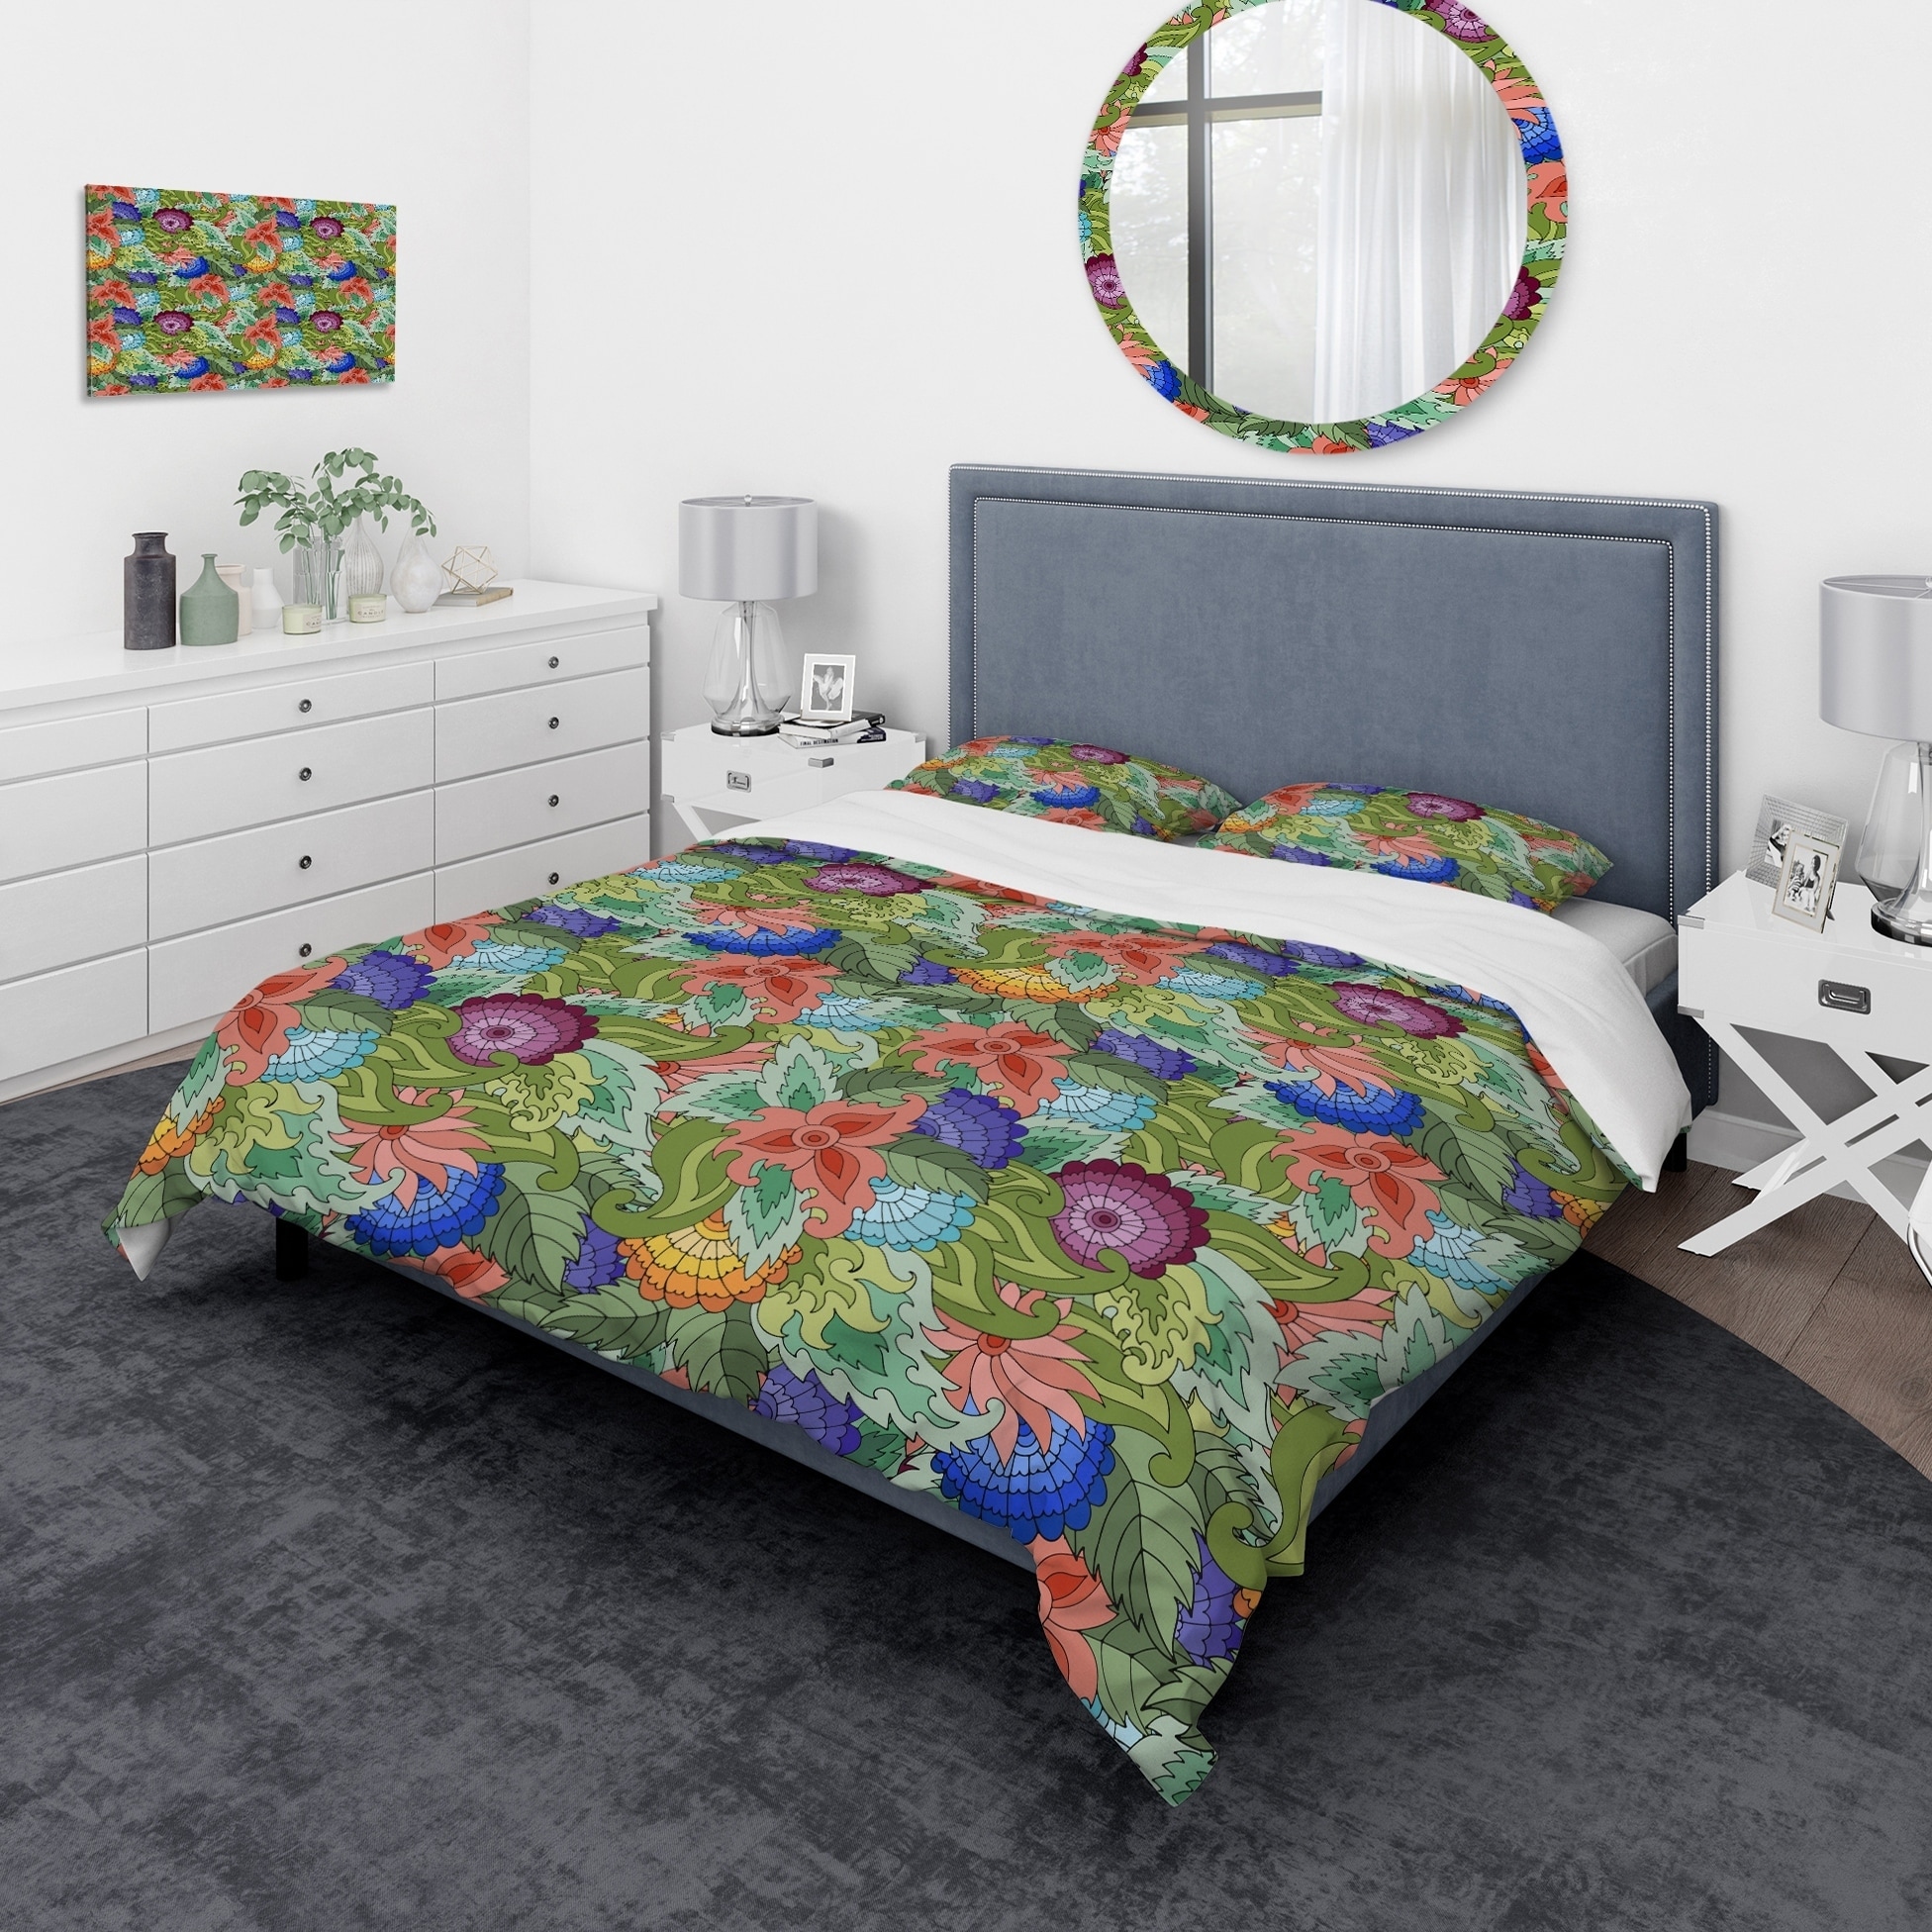 Abstract Floral Duvet Cover and Sham